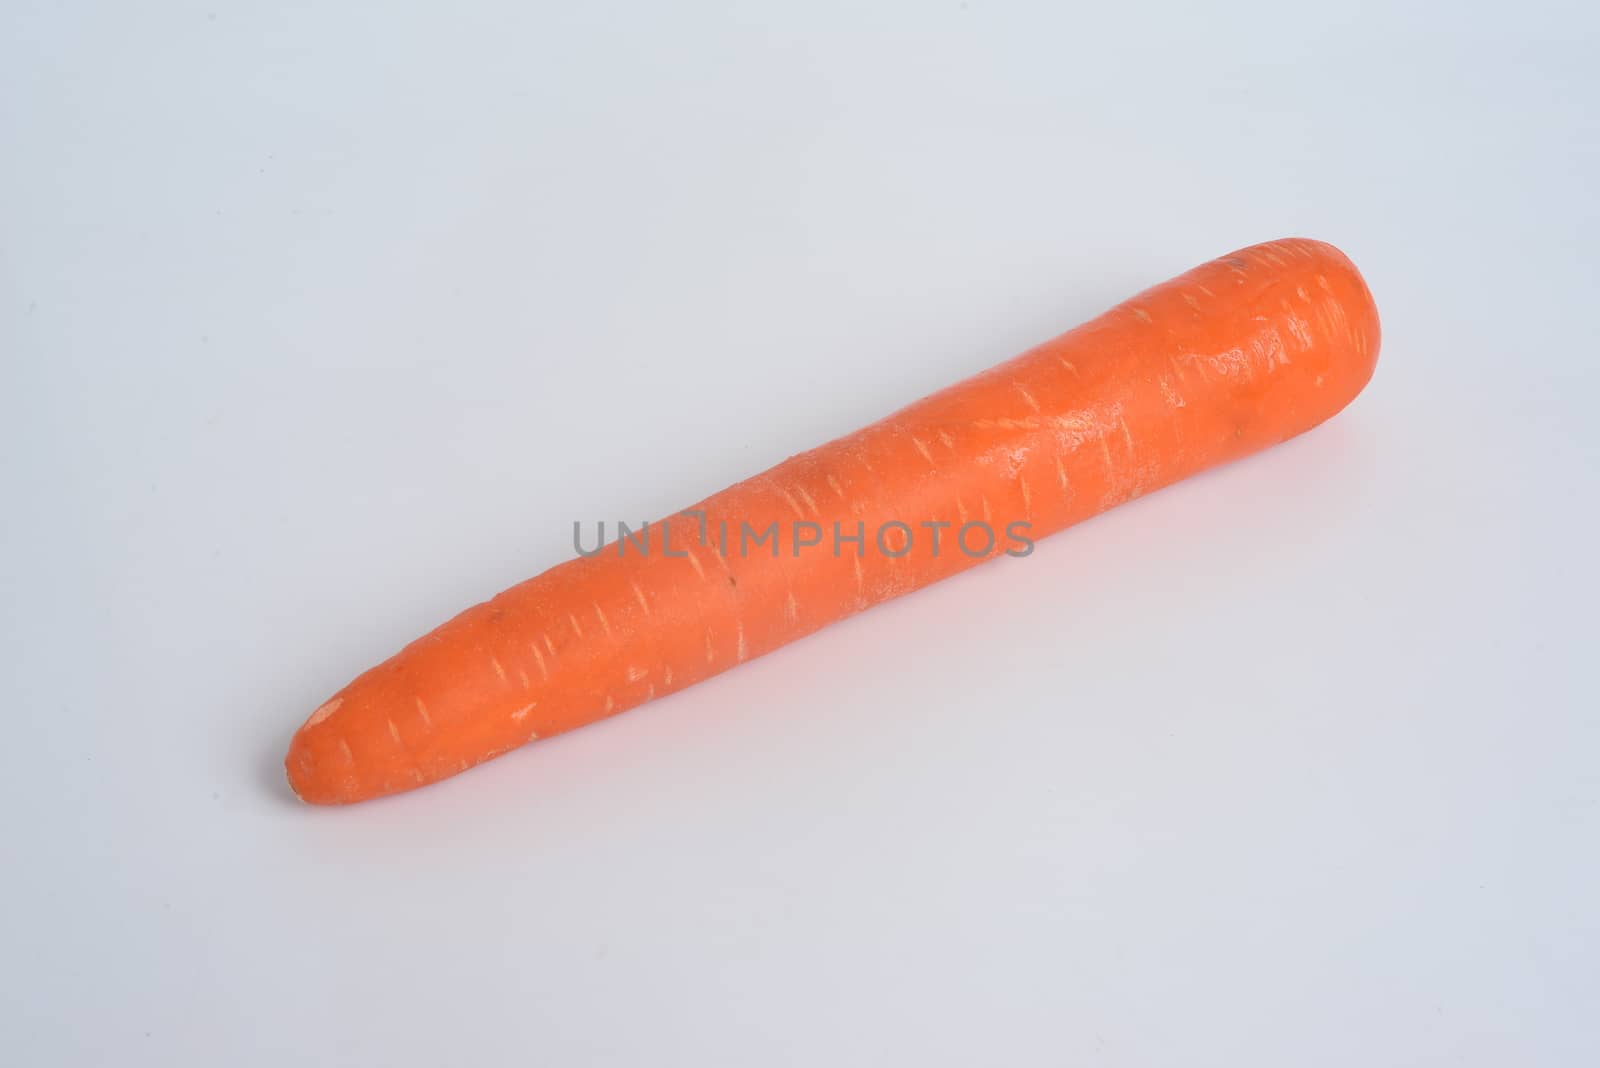 The carrot (Daucus carota subsp. sativus) is a root vegetable, usually orange in colour, with copy space for text